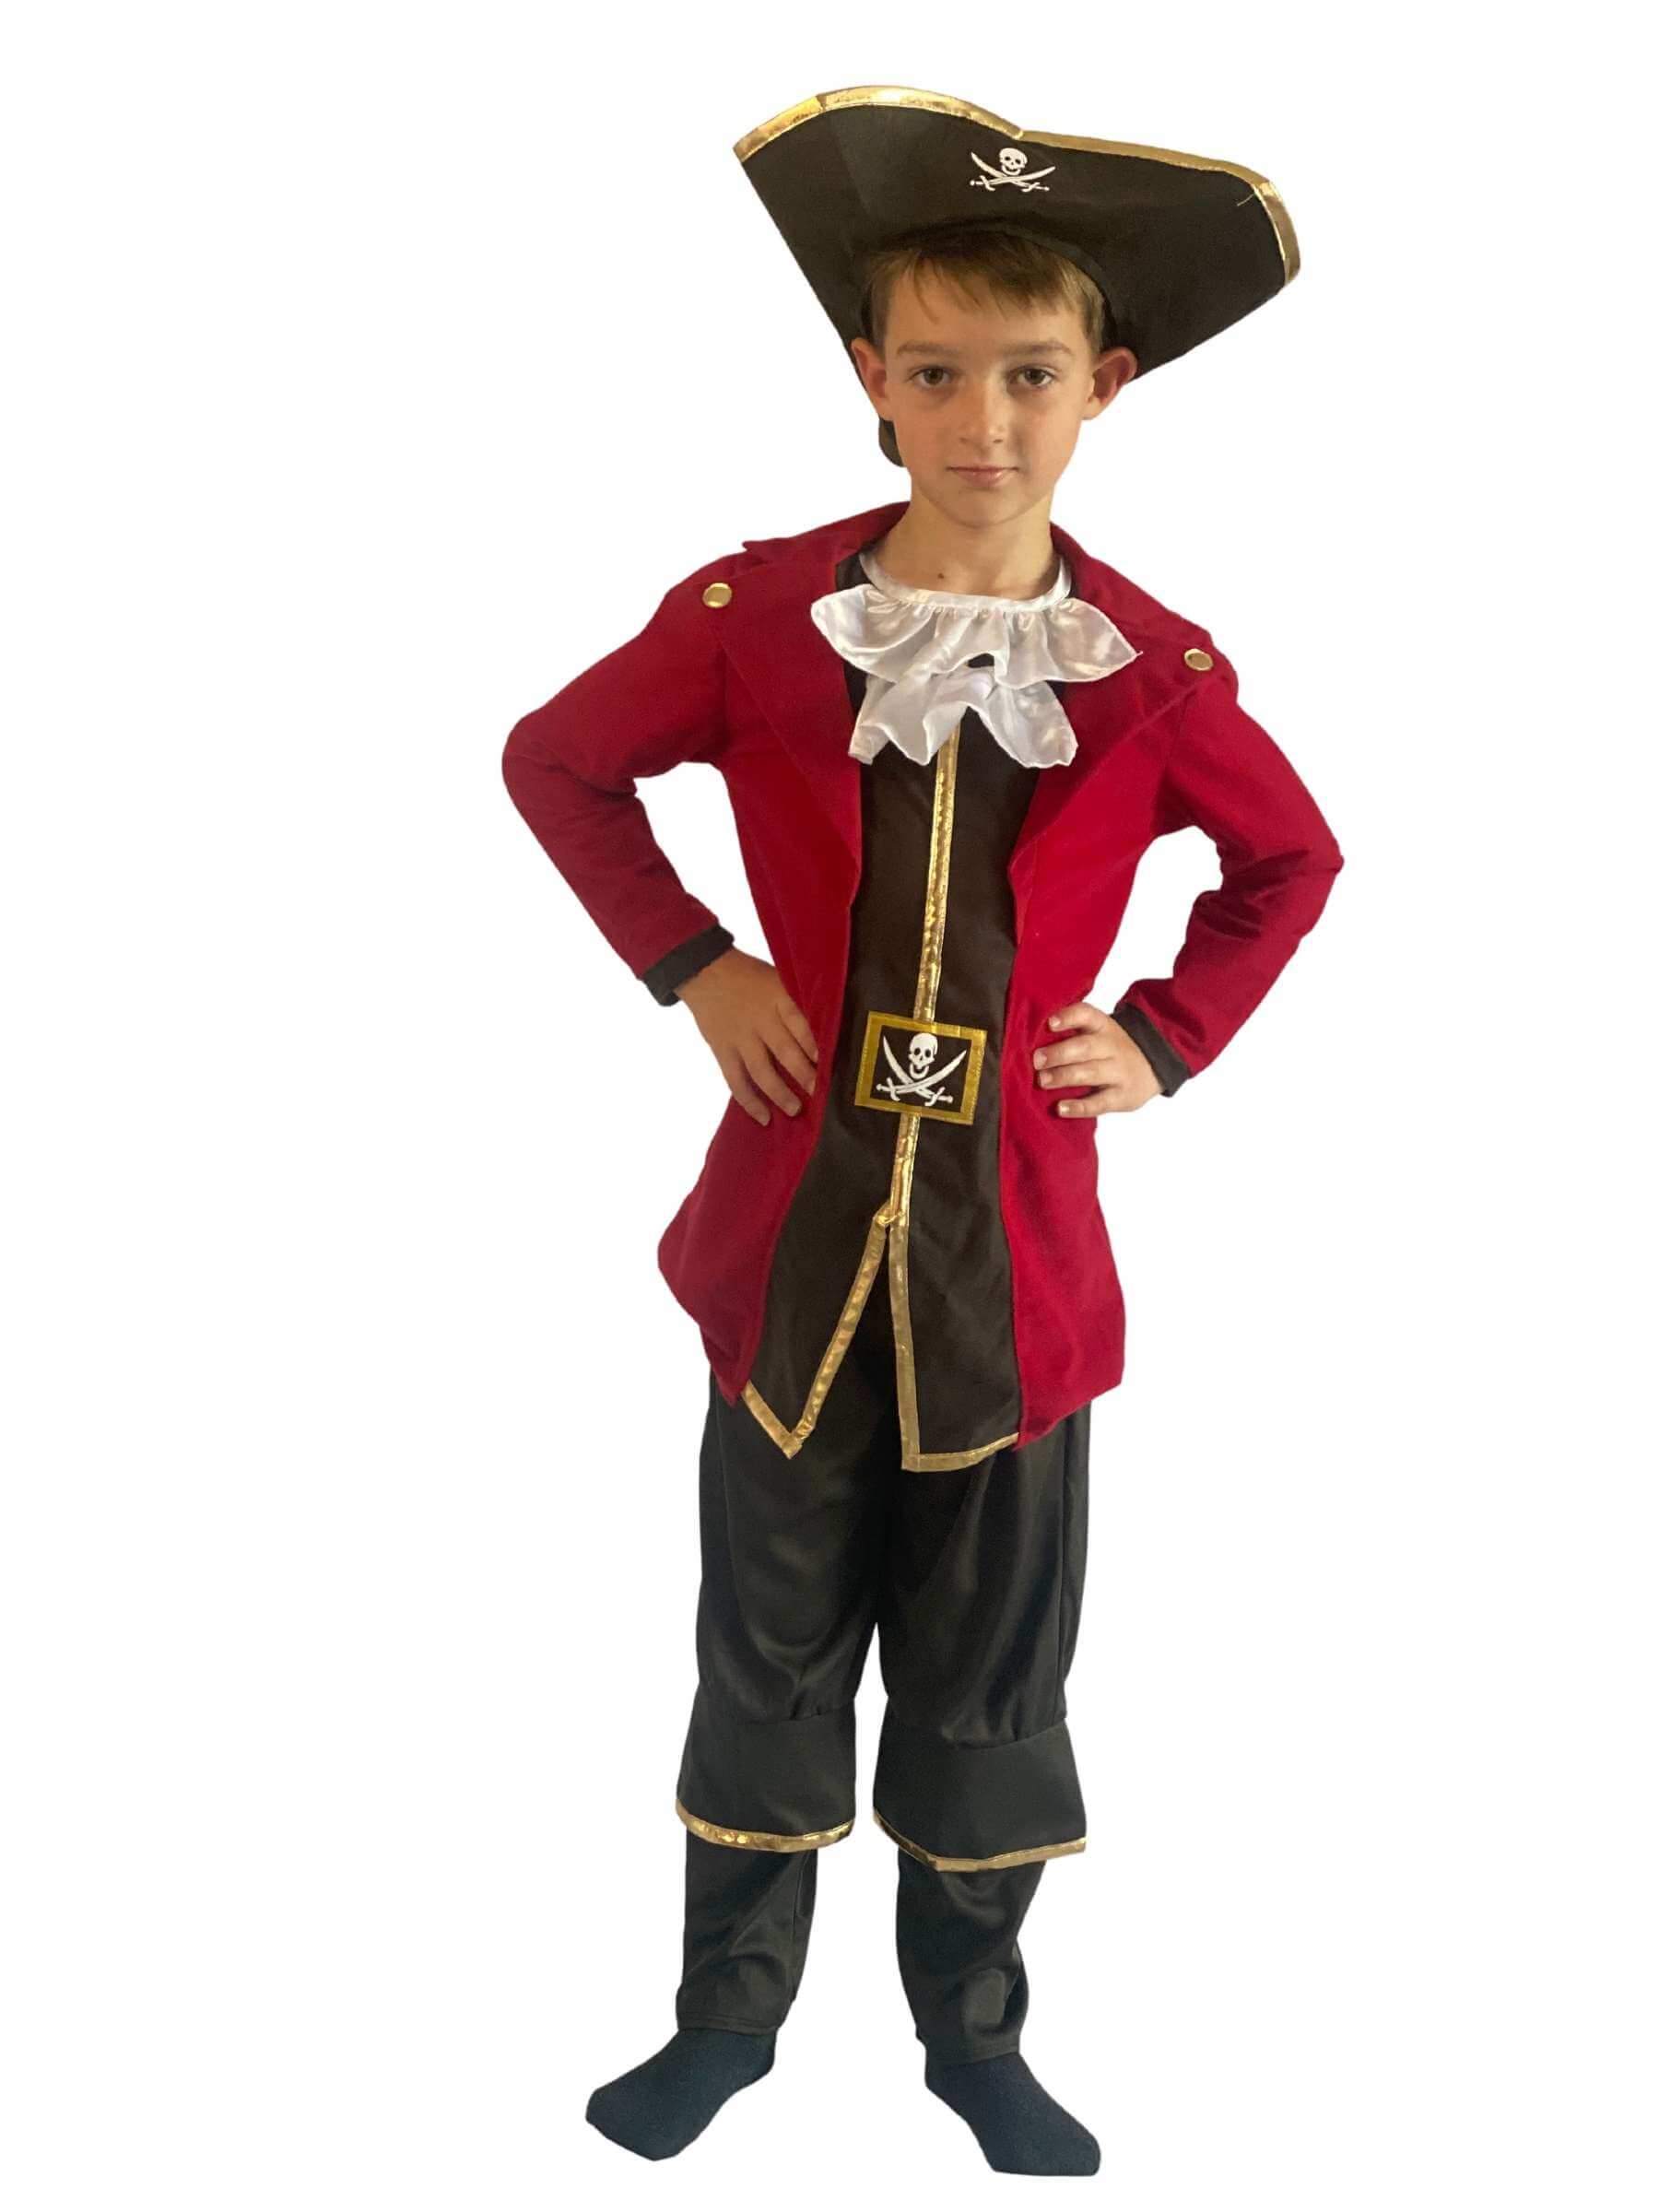 Child with hands on hip modelling red and black captain fancy dress costume with hat.